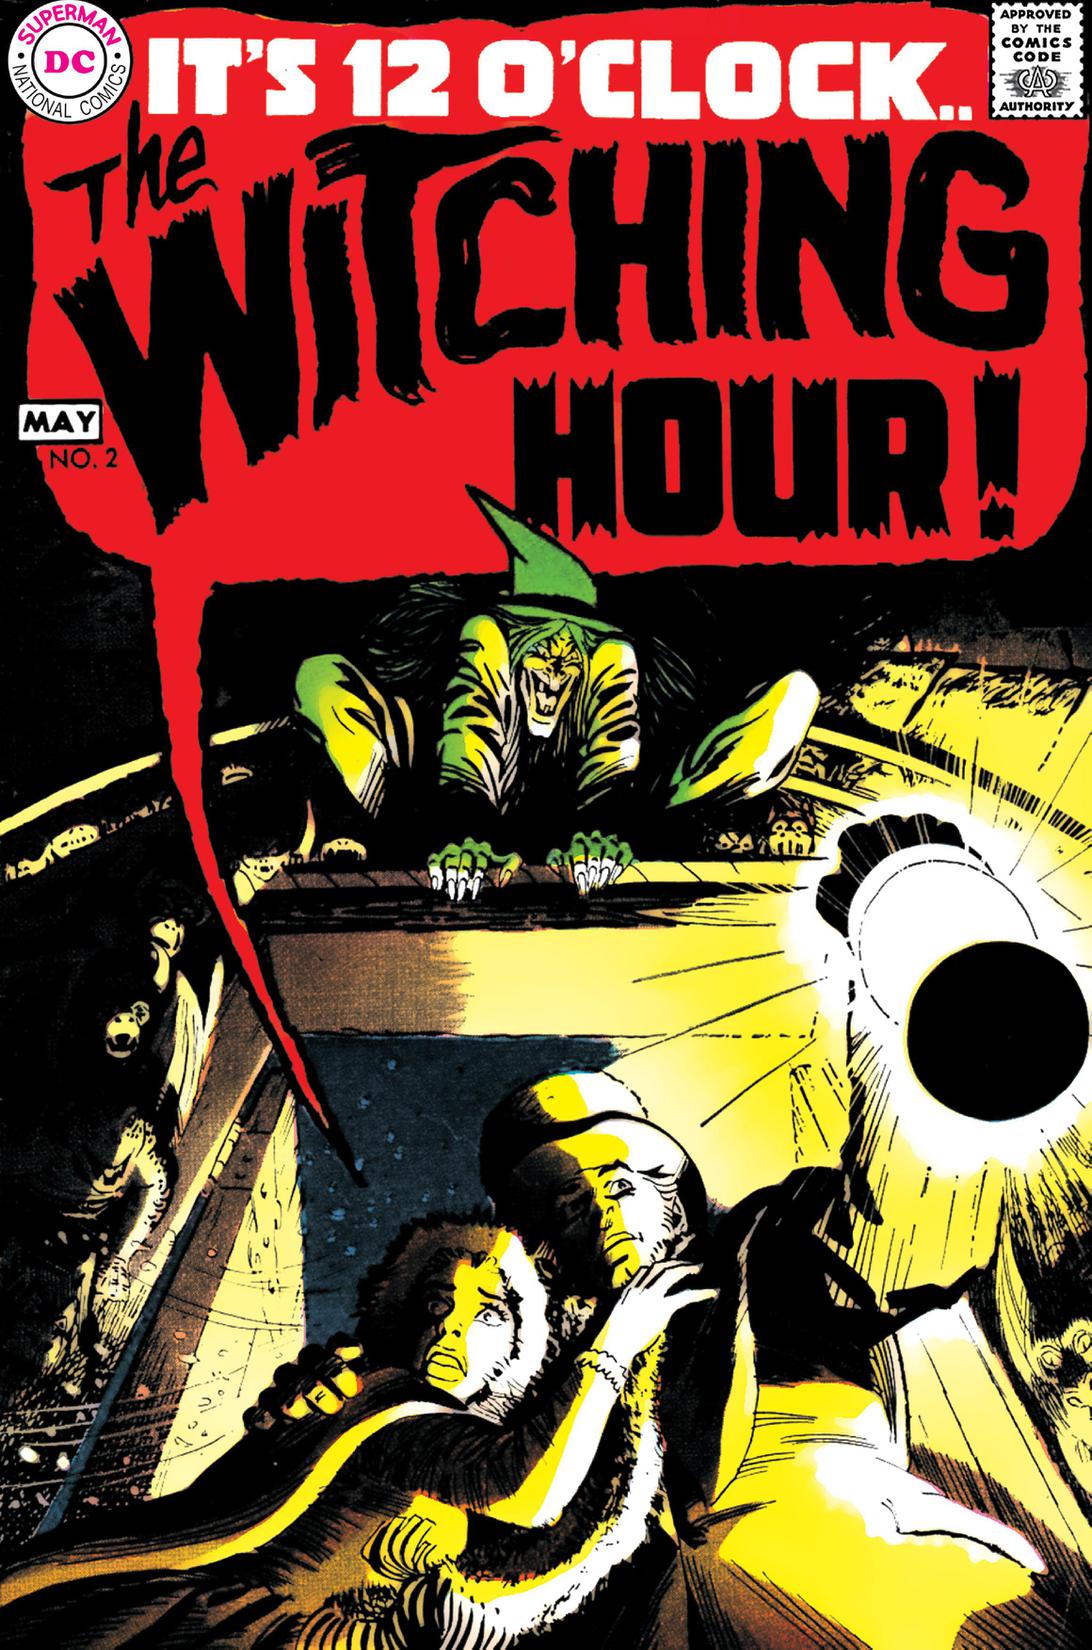 The Witching Hour #2 preview images